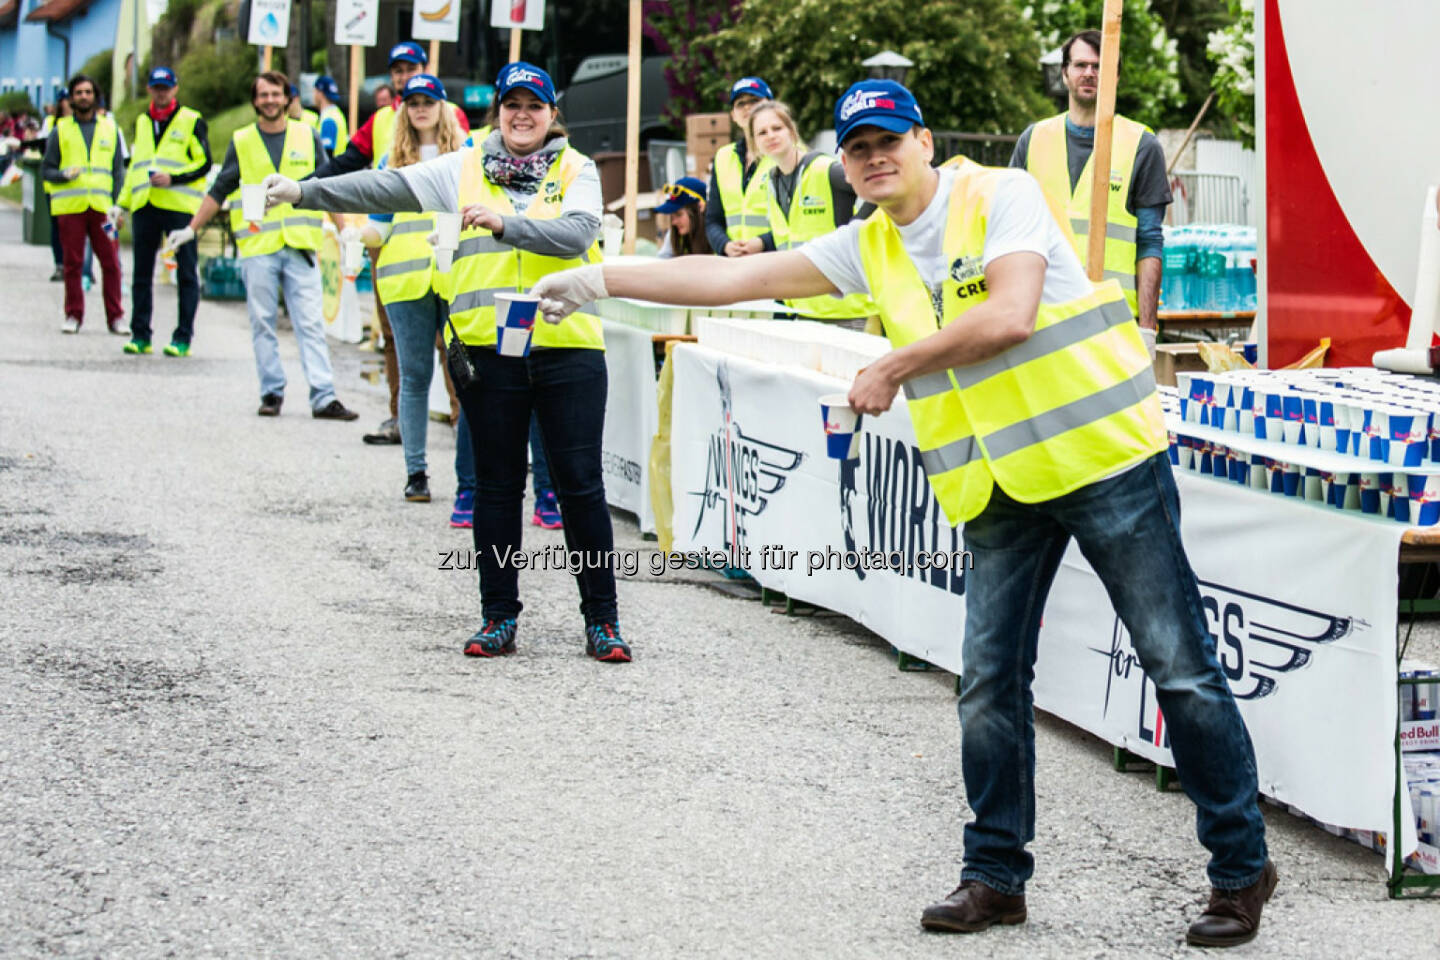 Volunteers hand out water to the participants at the Wings for Life World Run in St. Poelten, Austria on May, 3rd 2015. // Philipp Greindl for Wings for Life World Run // Please go to www.redbullcontentpool.com for further information. // 